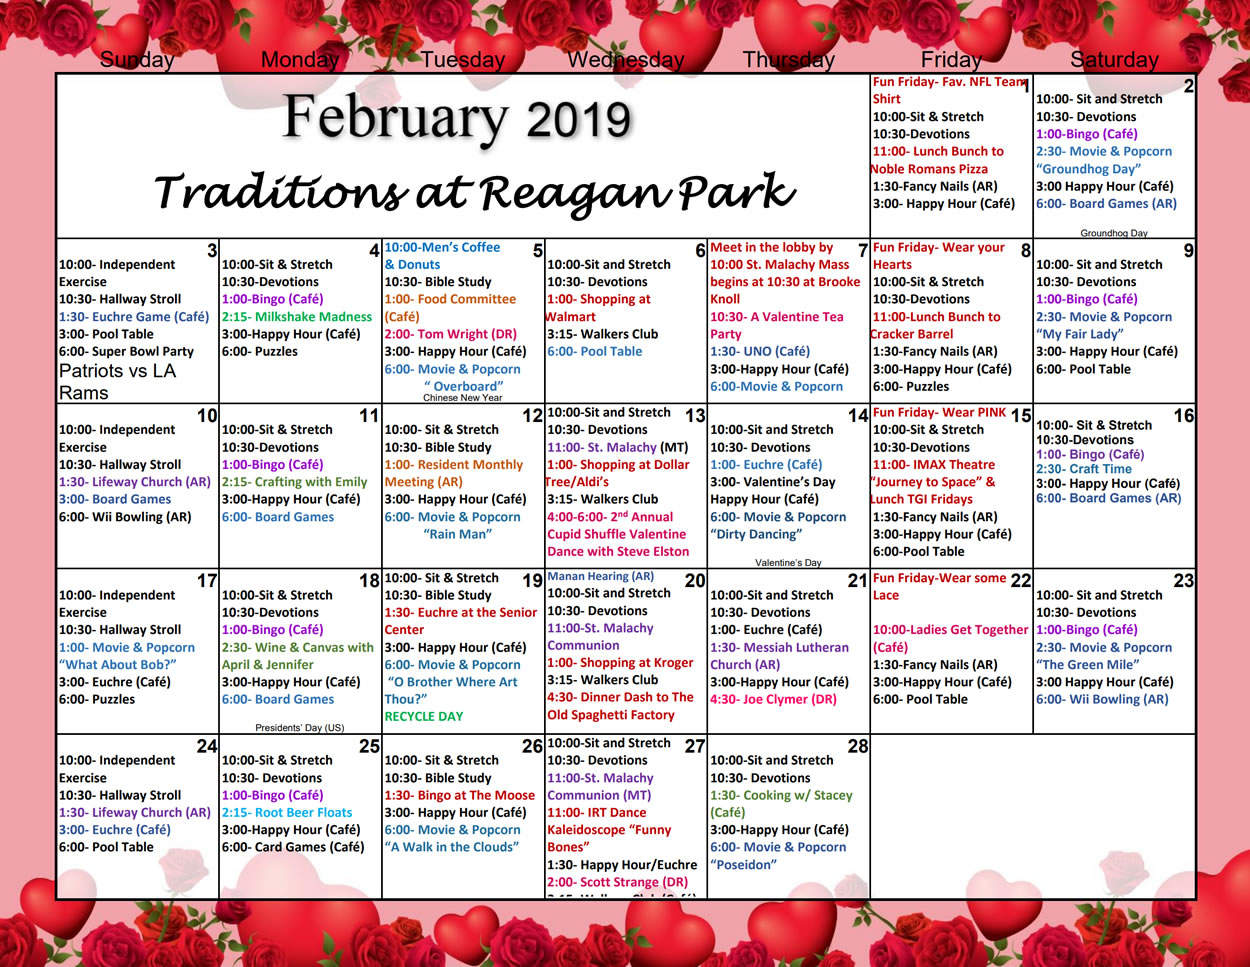 February Calendar & Activities Assisted Living Traditions at Reagan Park